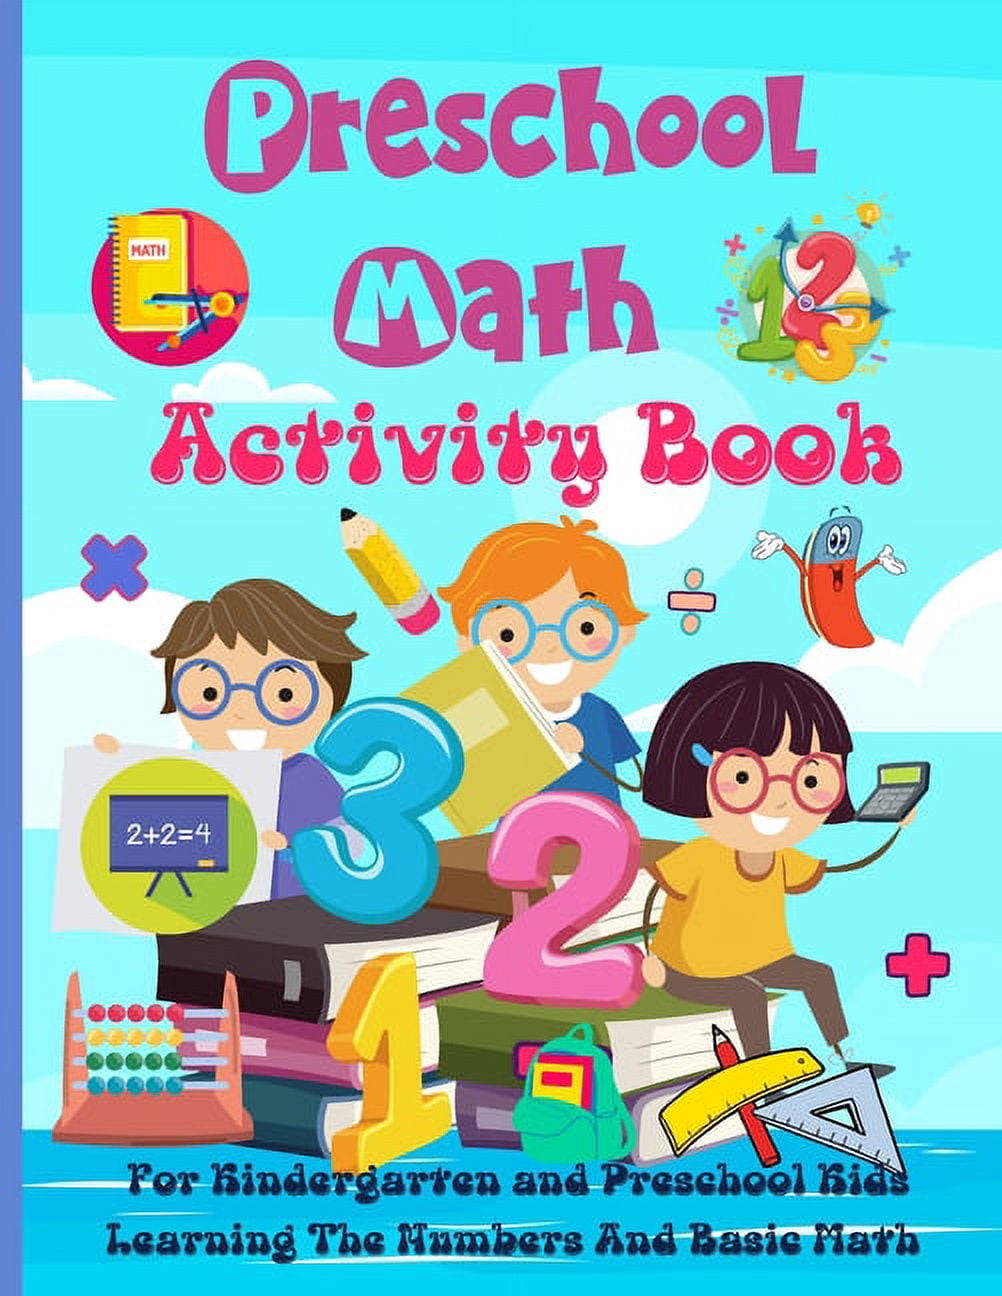 Airplane Activity Book For Clever Kids Ages 4-8: Preschool Activities  ,Kindergarten Workbooks, Phonics, Handwriting Practice, Math, Early Summer  Learning Activities by BABY STAR PRESS